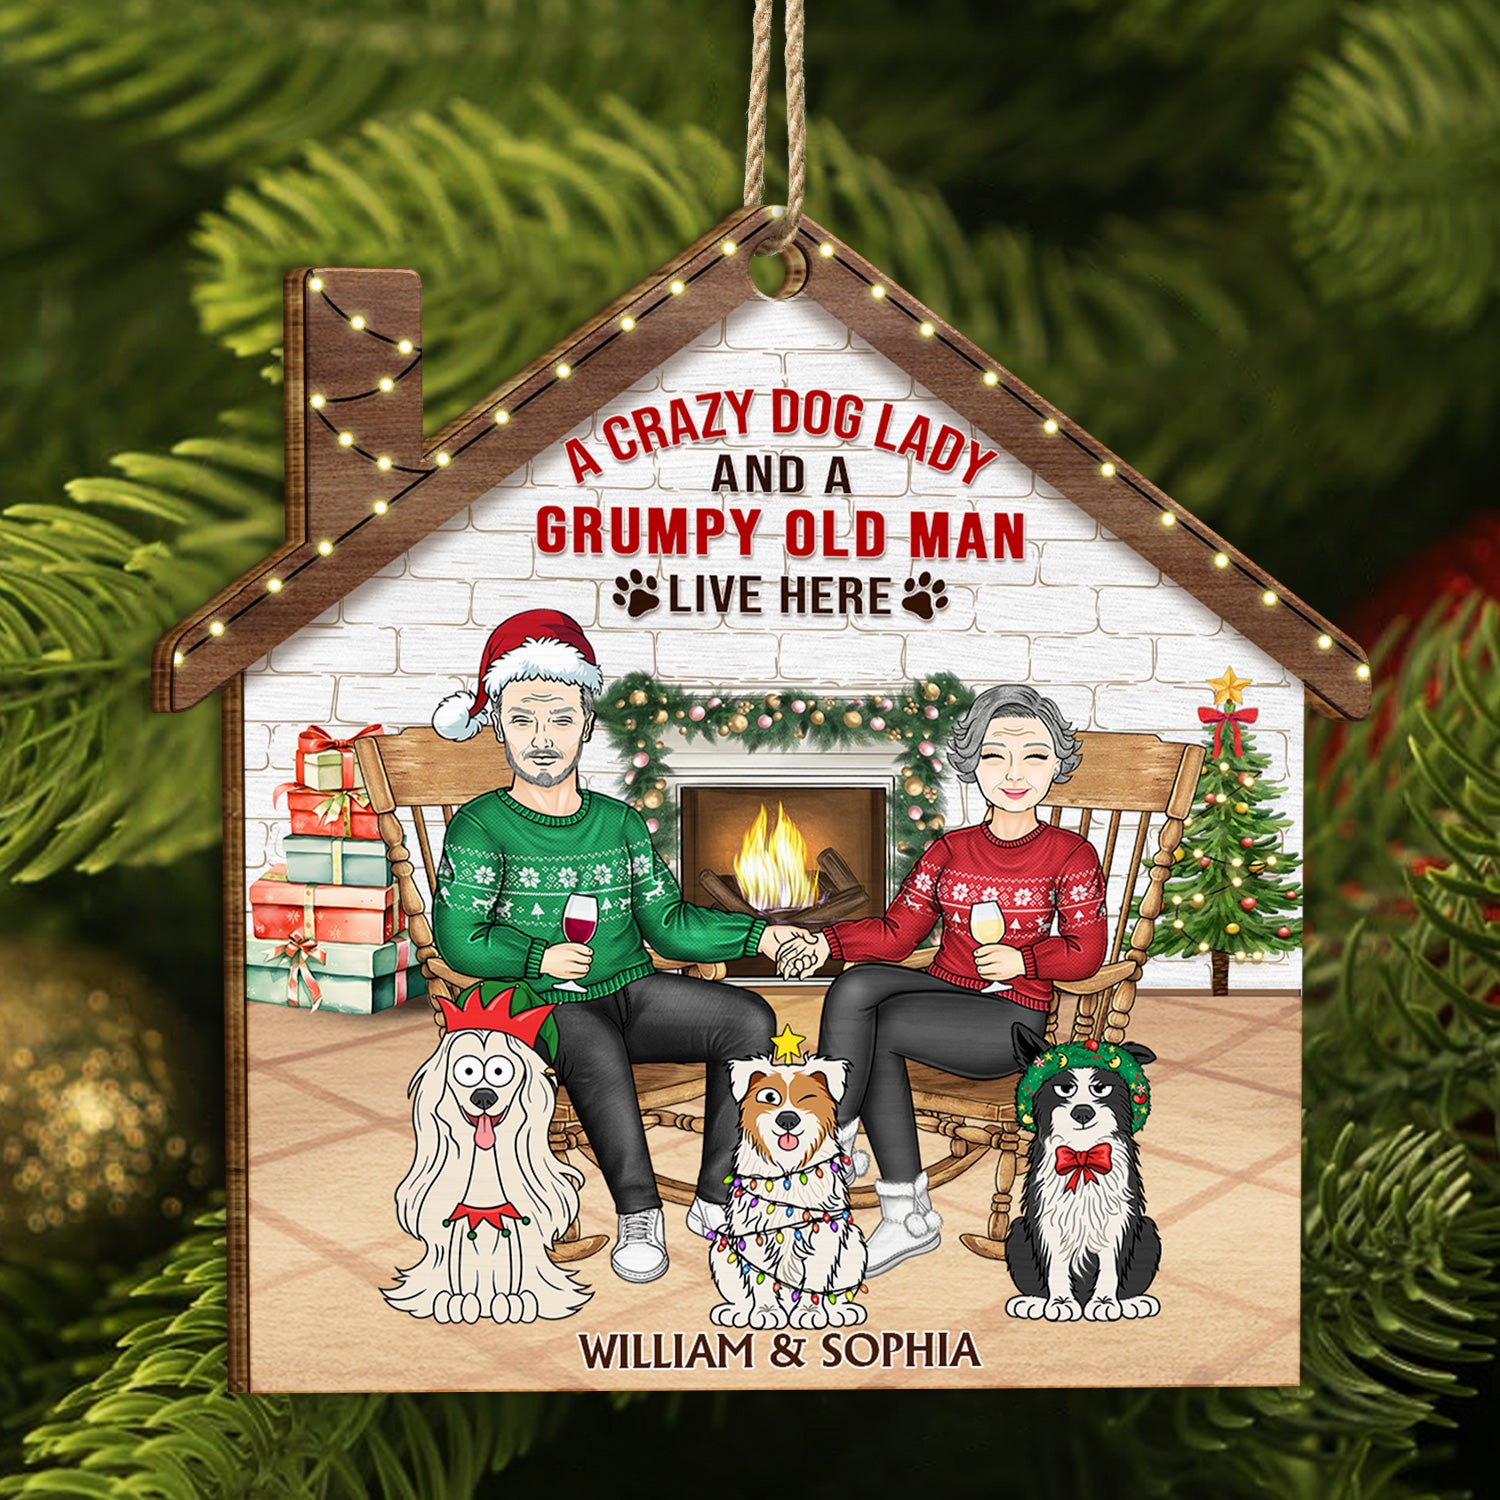 A Crazy Dog Lady And Her Grumpy Old Man Live Here - Christmas Gift For Couple, Pet Lovers And Family - Personalized Custom Shaped Wooden Ornament